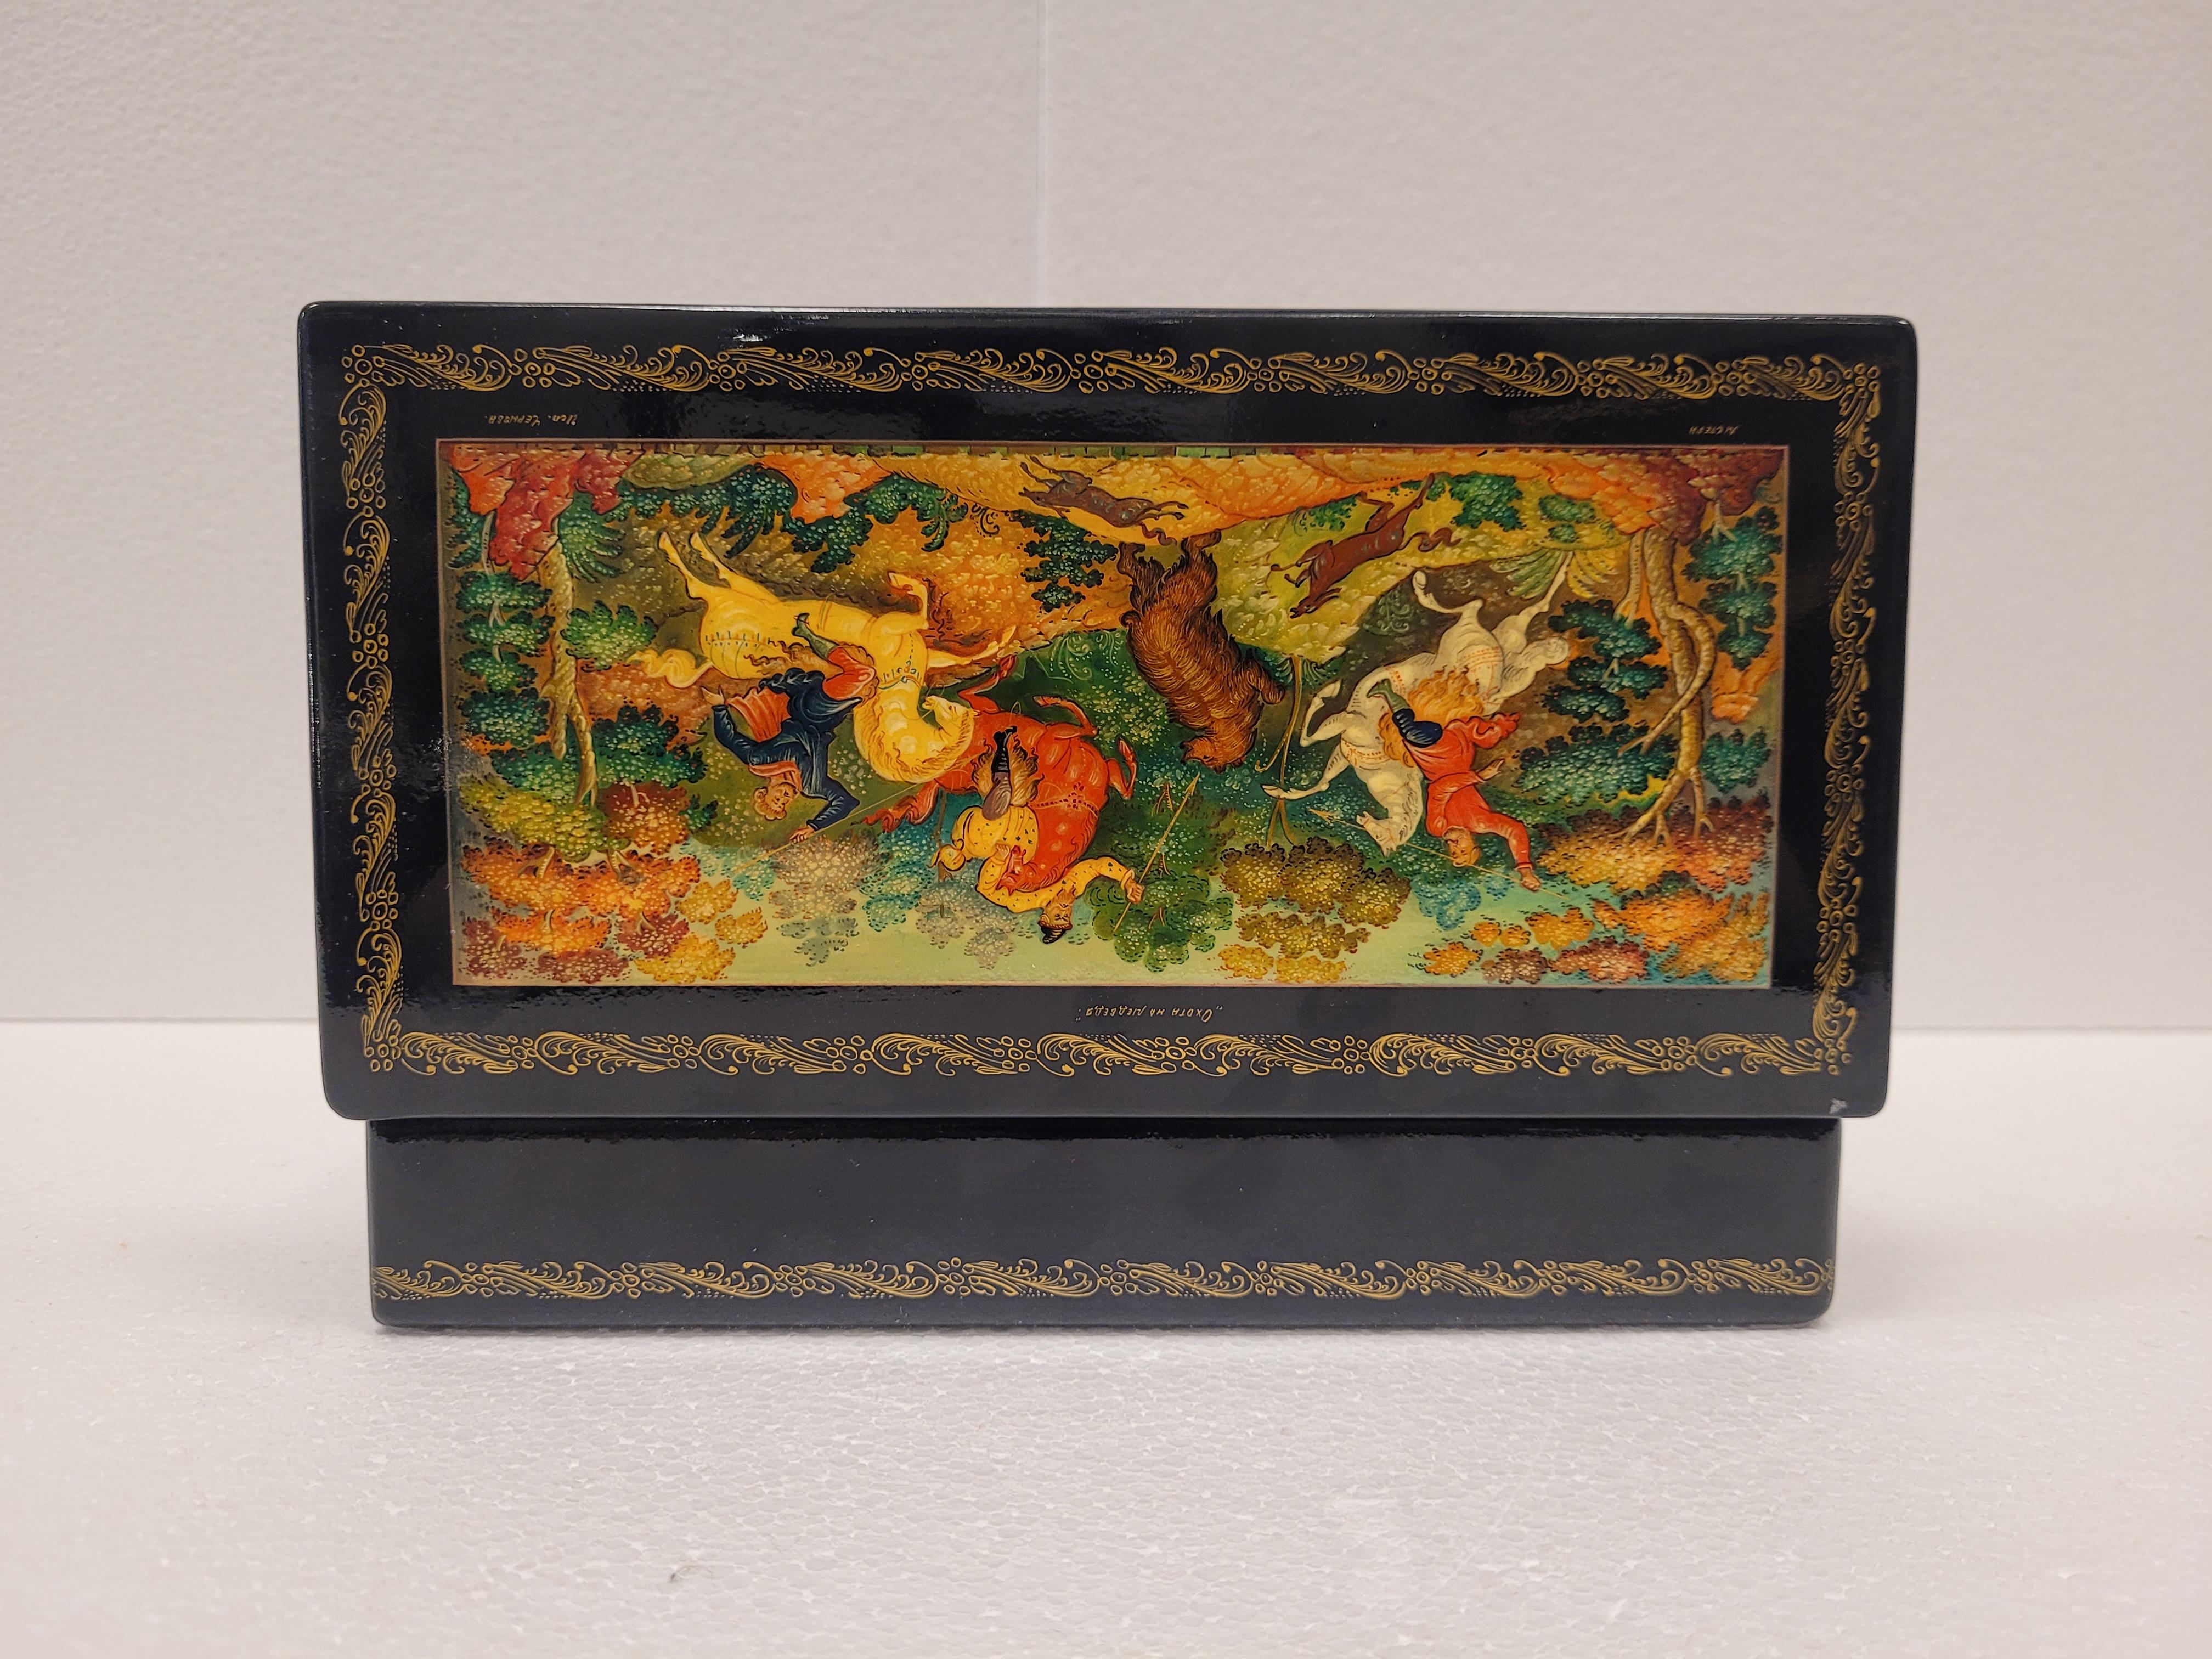 Beautiful hand-painted lacquer box, rectangular profile. Russia

Wonderful piece of Russian craftsmanship. Painted lacquer boxes are one of the most typical Russian crafts, they are made of soft wood or paper mache and are painted with oil